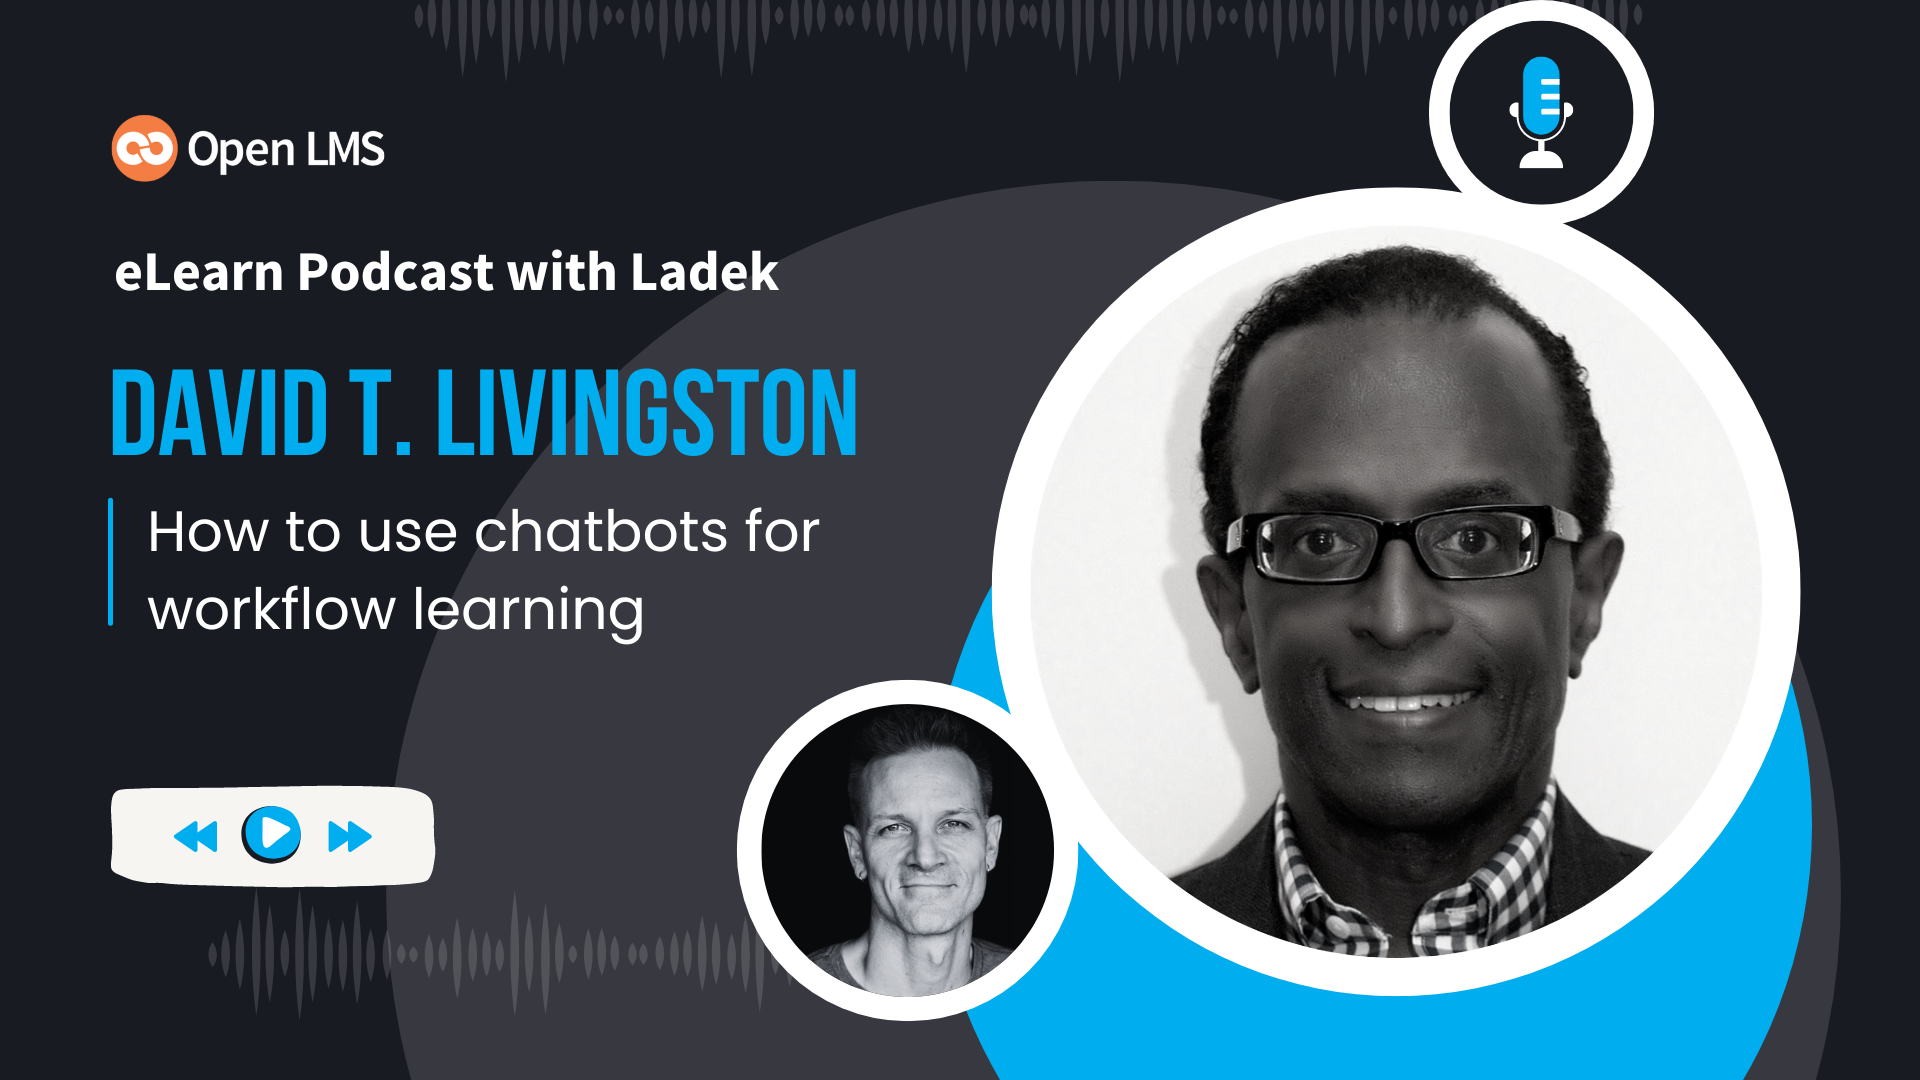 Chatbots For Workflow Learning with David T. Livingston, Ph.D.